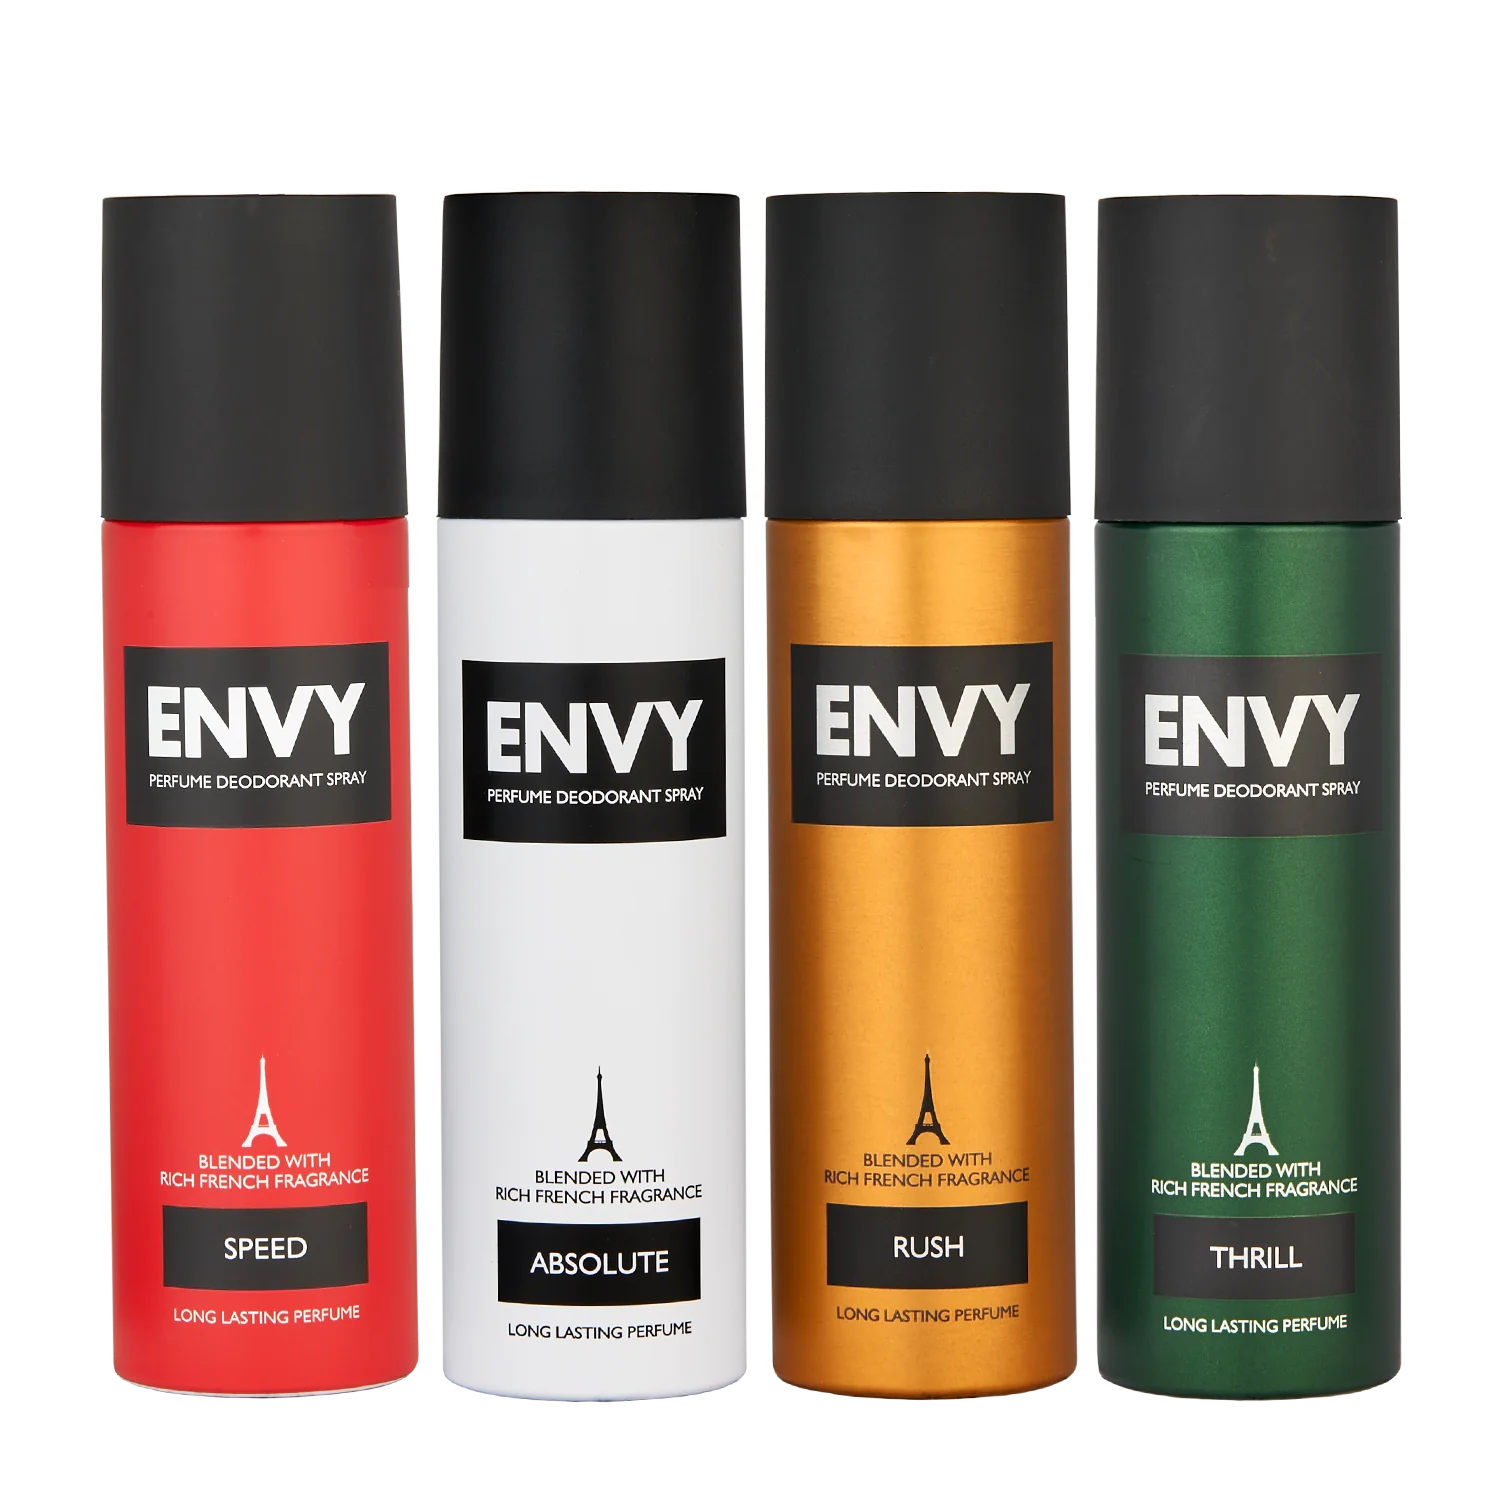 Envy Deodorant Combo SPEED + Absolute + Rush + Thrill